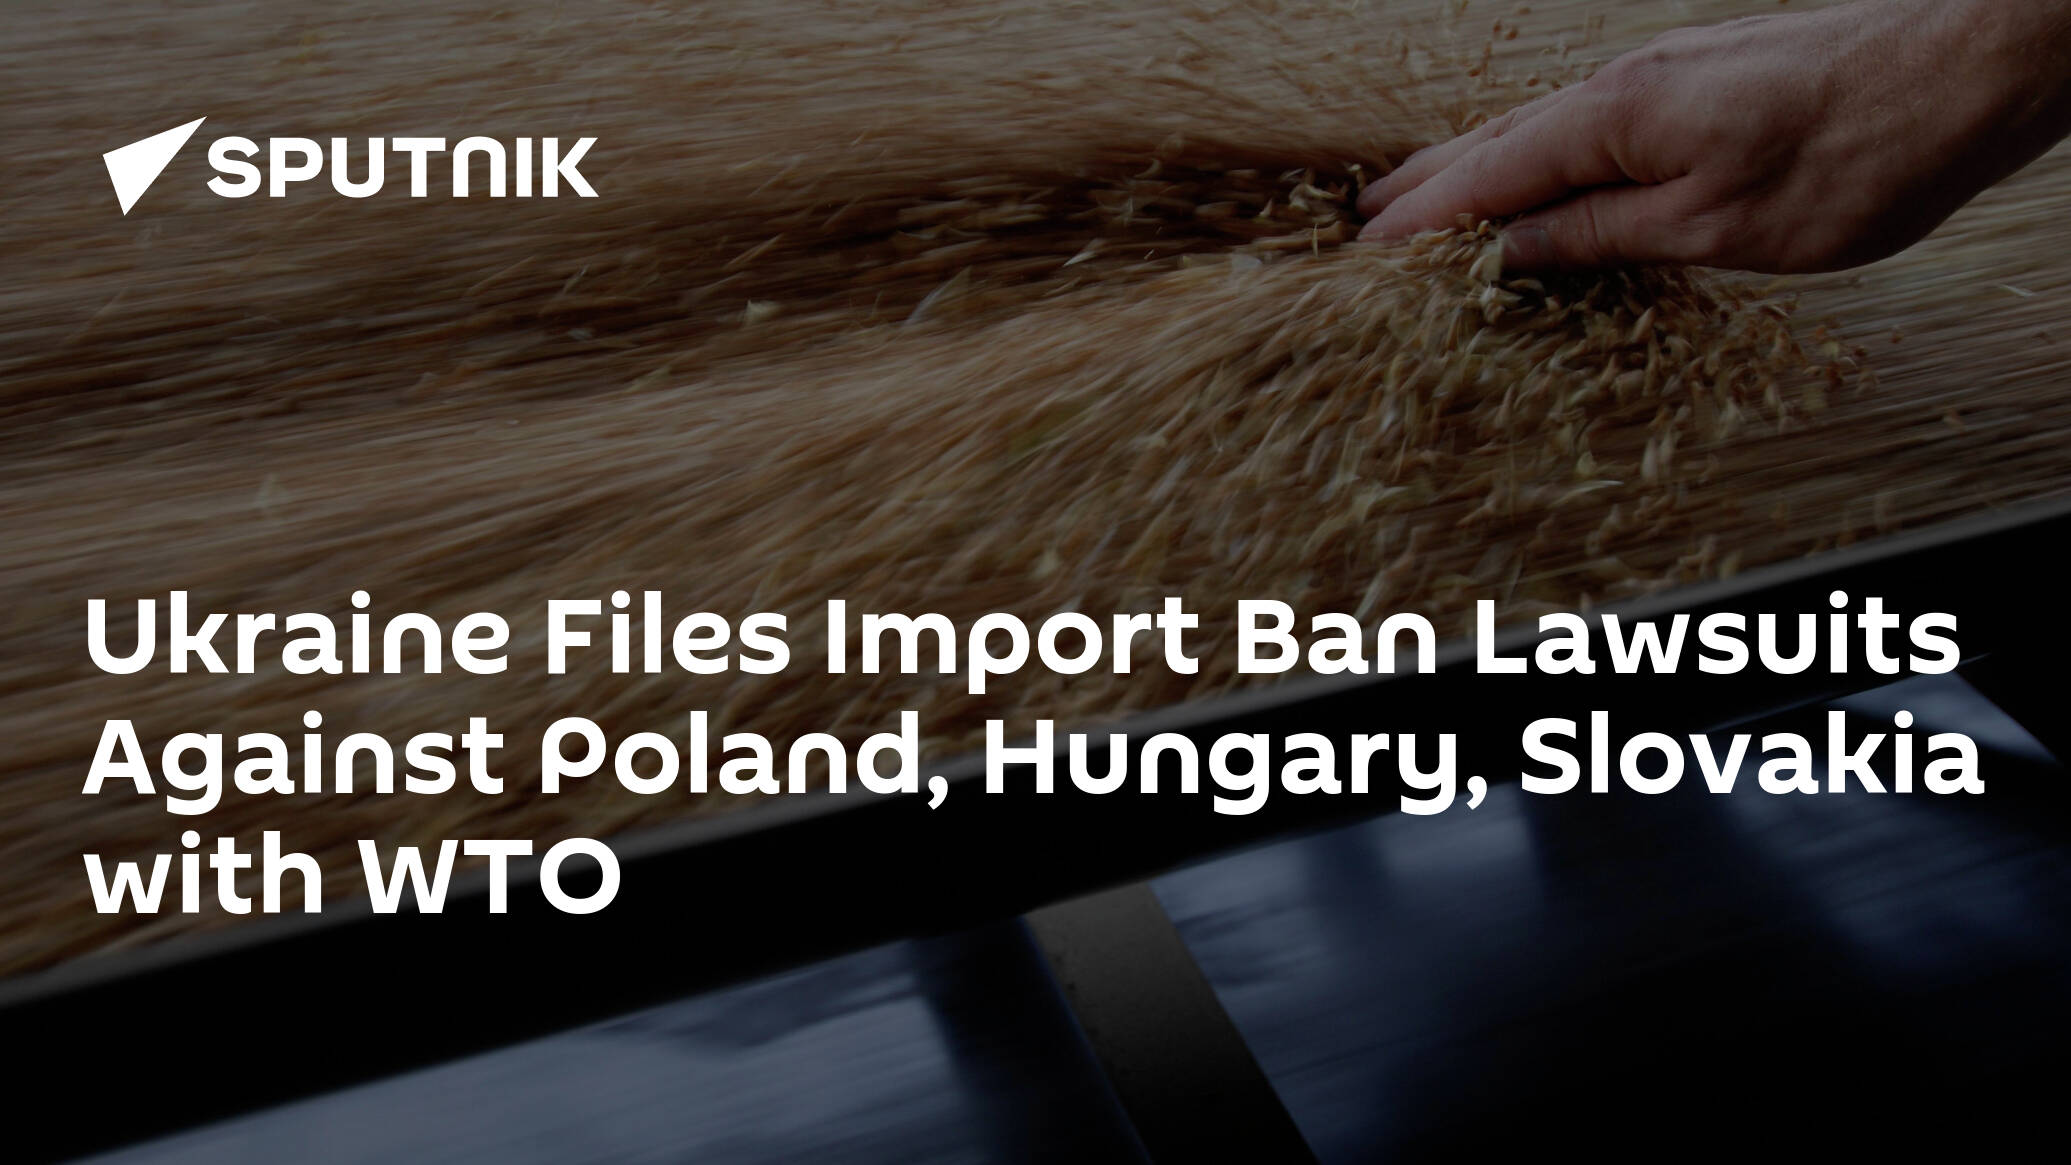 Ukraine Files Import Ban Lawsuits Against Poland, Hungary, Slovakia with WTO